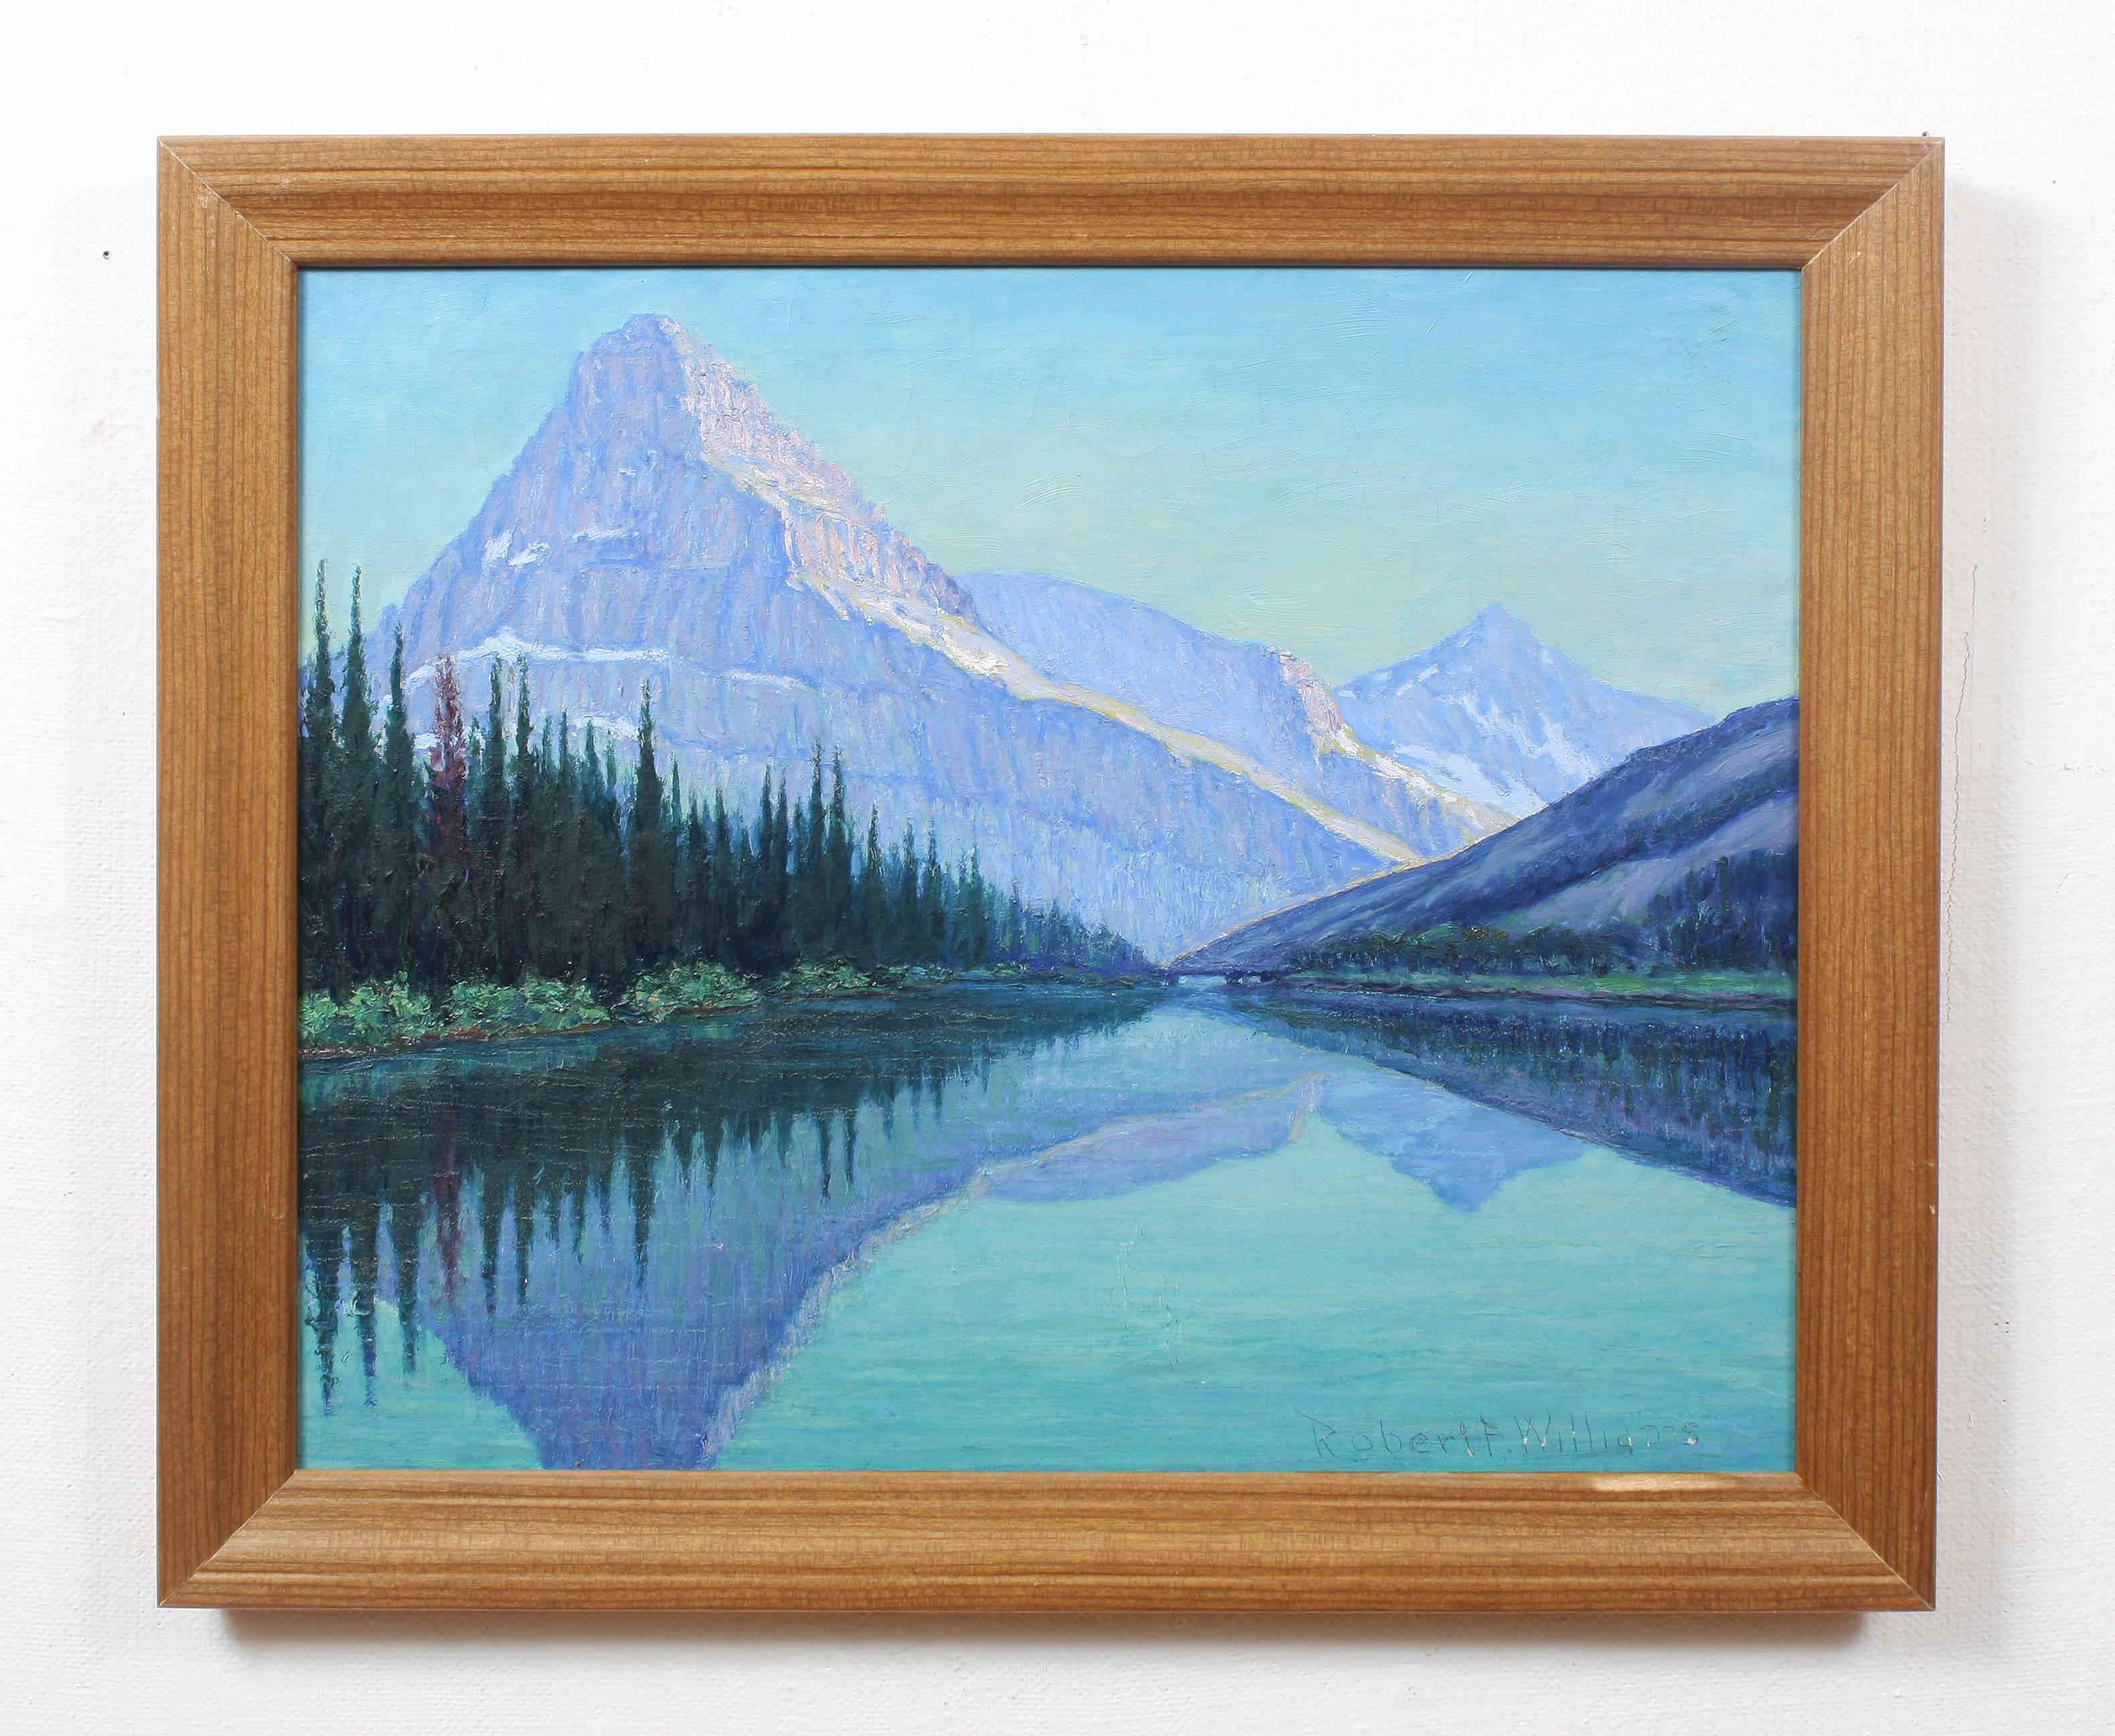 Glacier National Park Winter Landscape - Painting by Robert Francis Williams